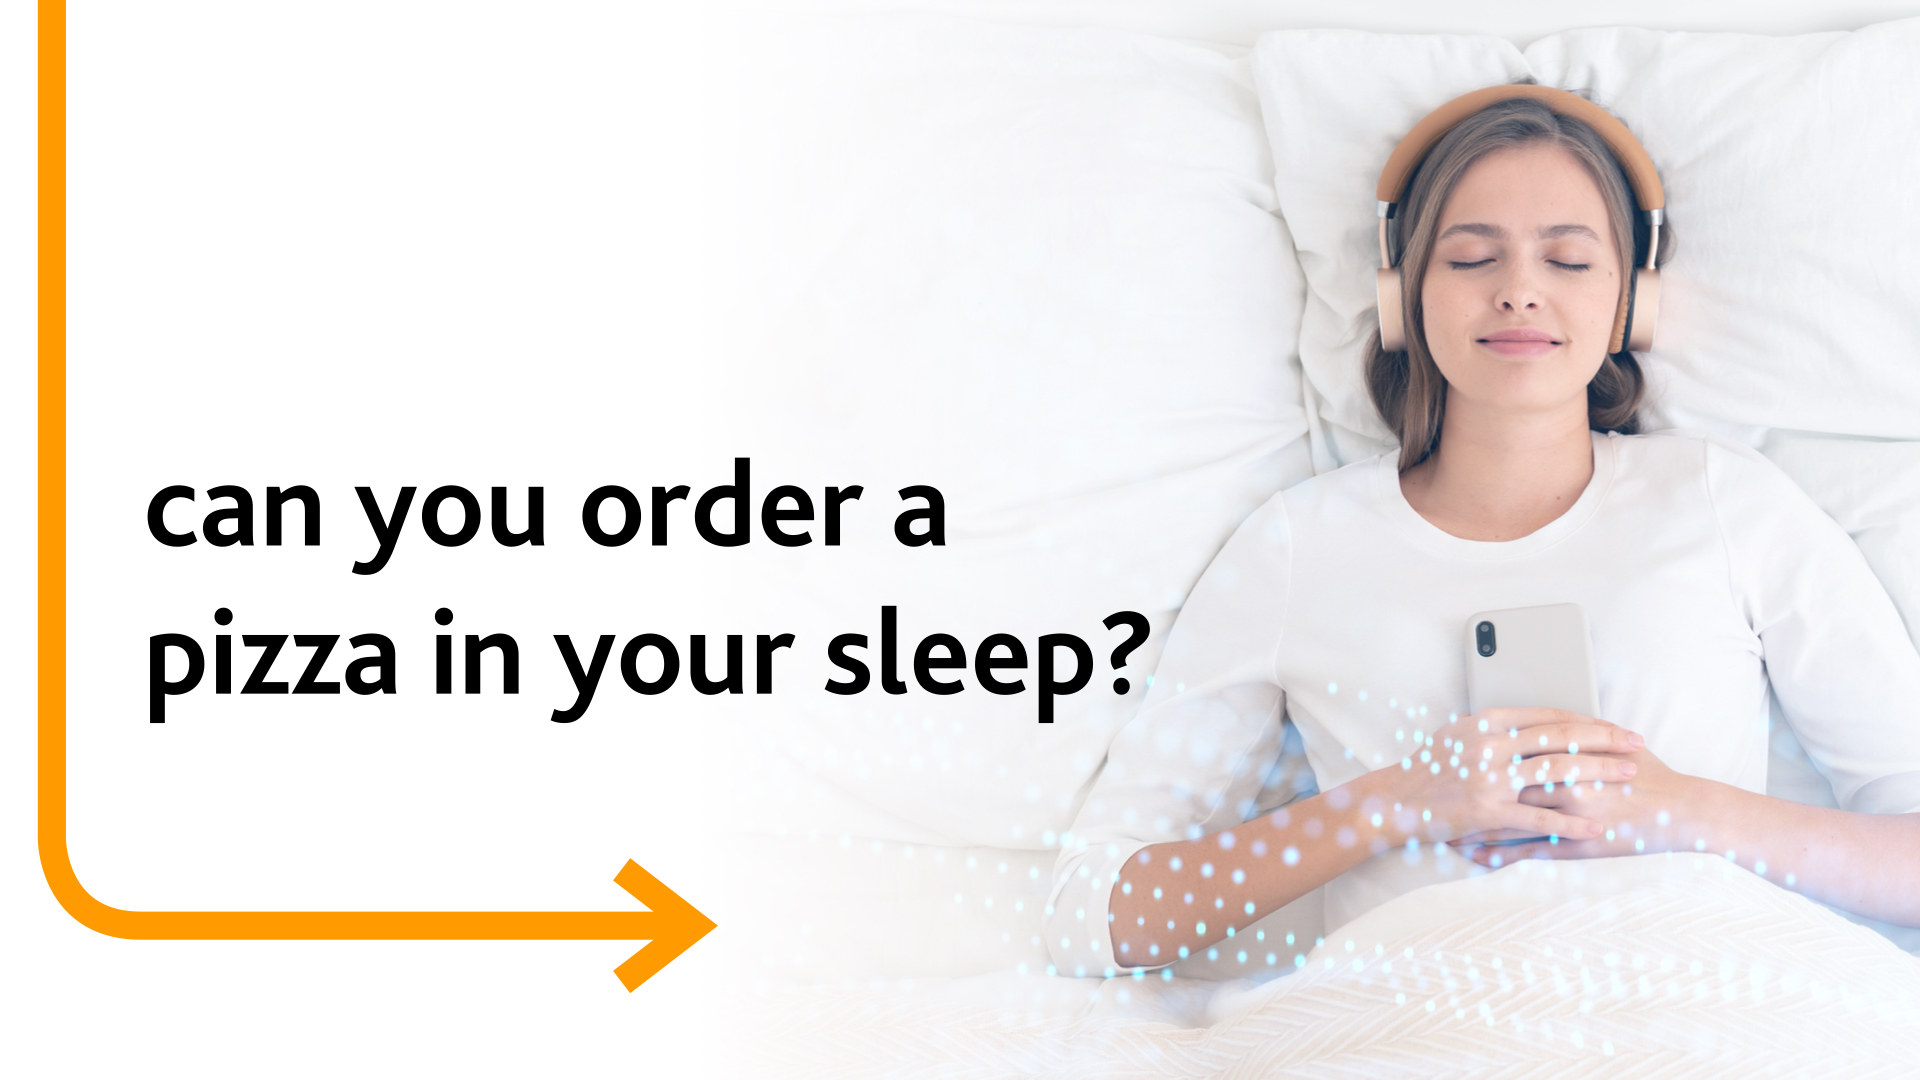 Can you order a pizza in your sleep?